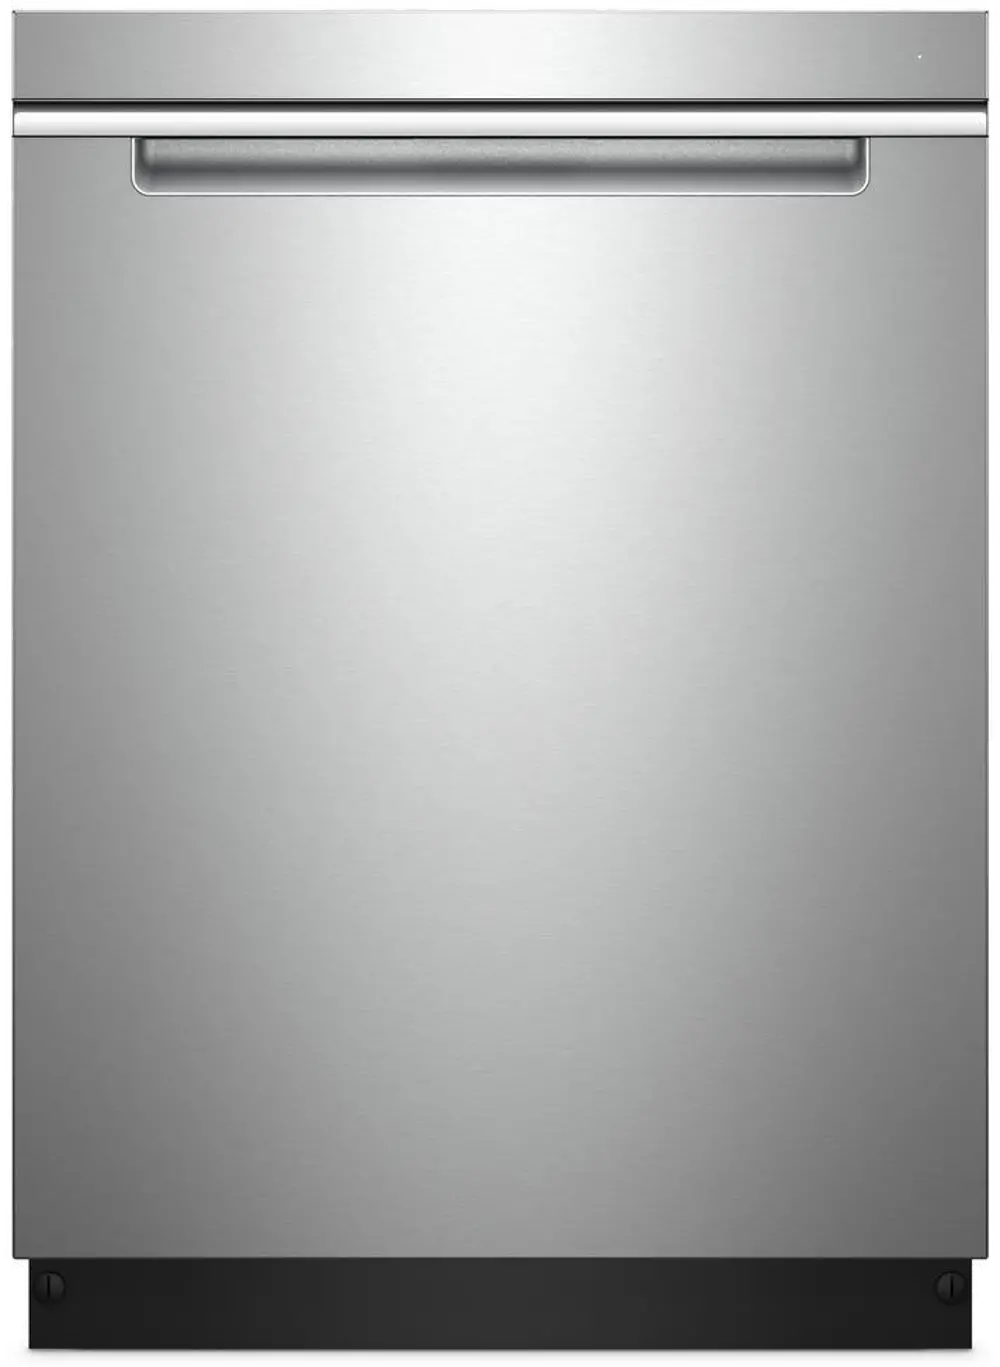 WDTA50SAHZ Whirlpool Recessed Handle Dishwasher with TotalCoverage Arm - Fingerprint Resistant Stainless Steel-1